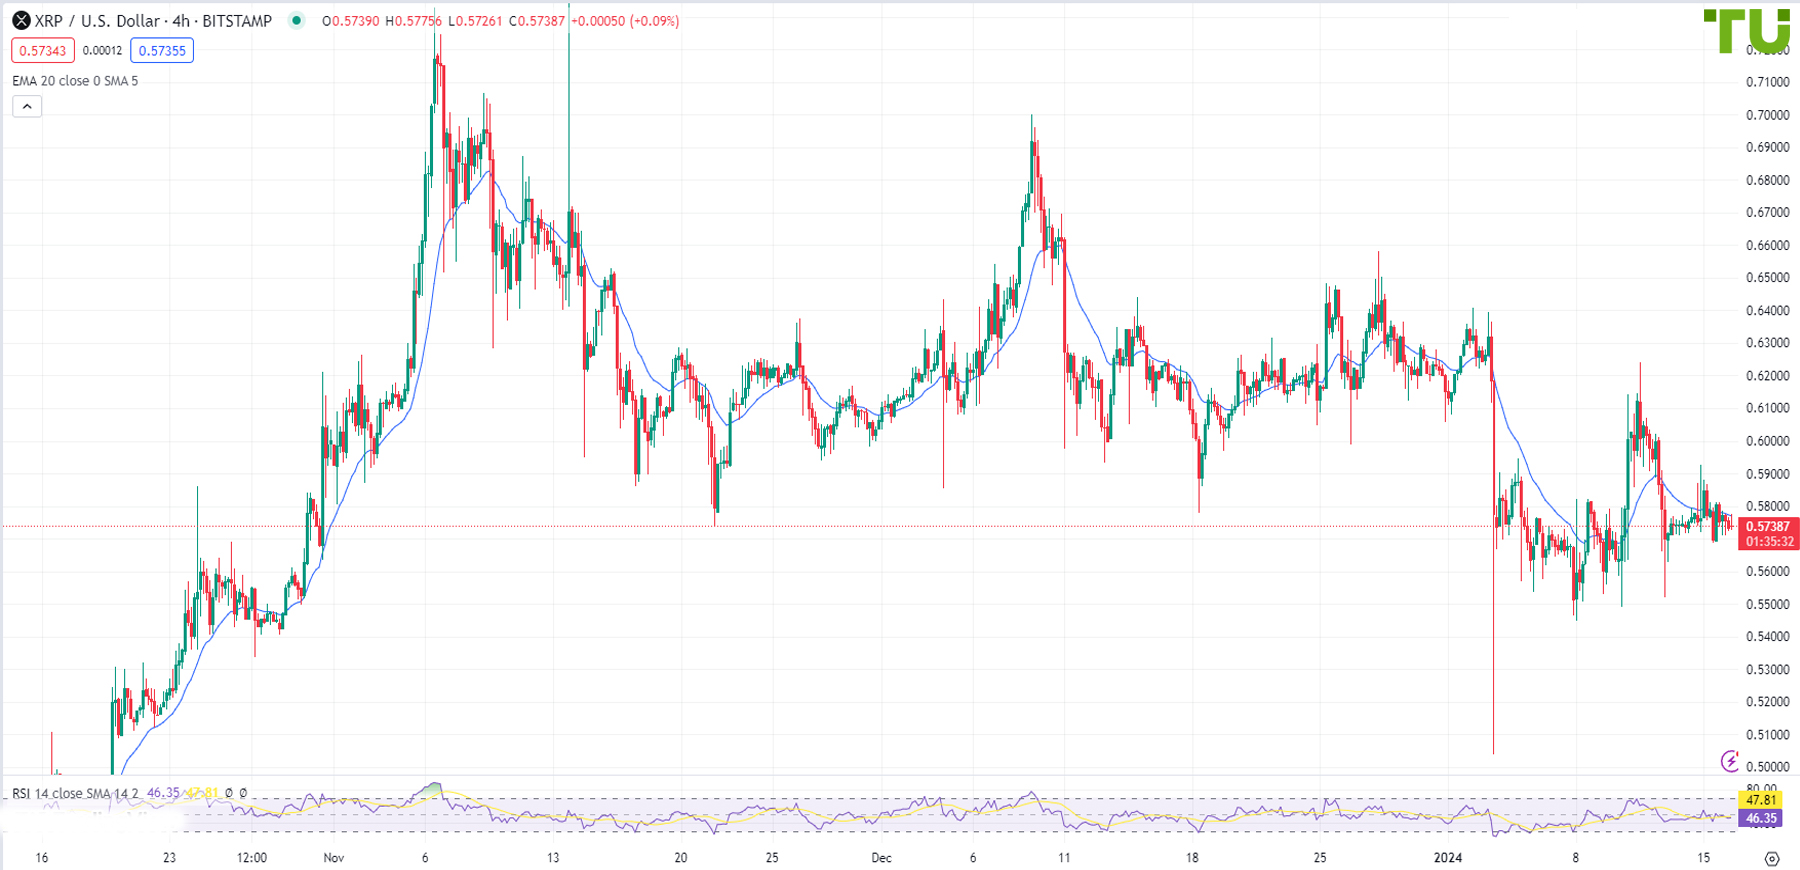 XRP/USD returned to the consolidation range